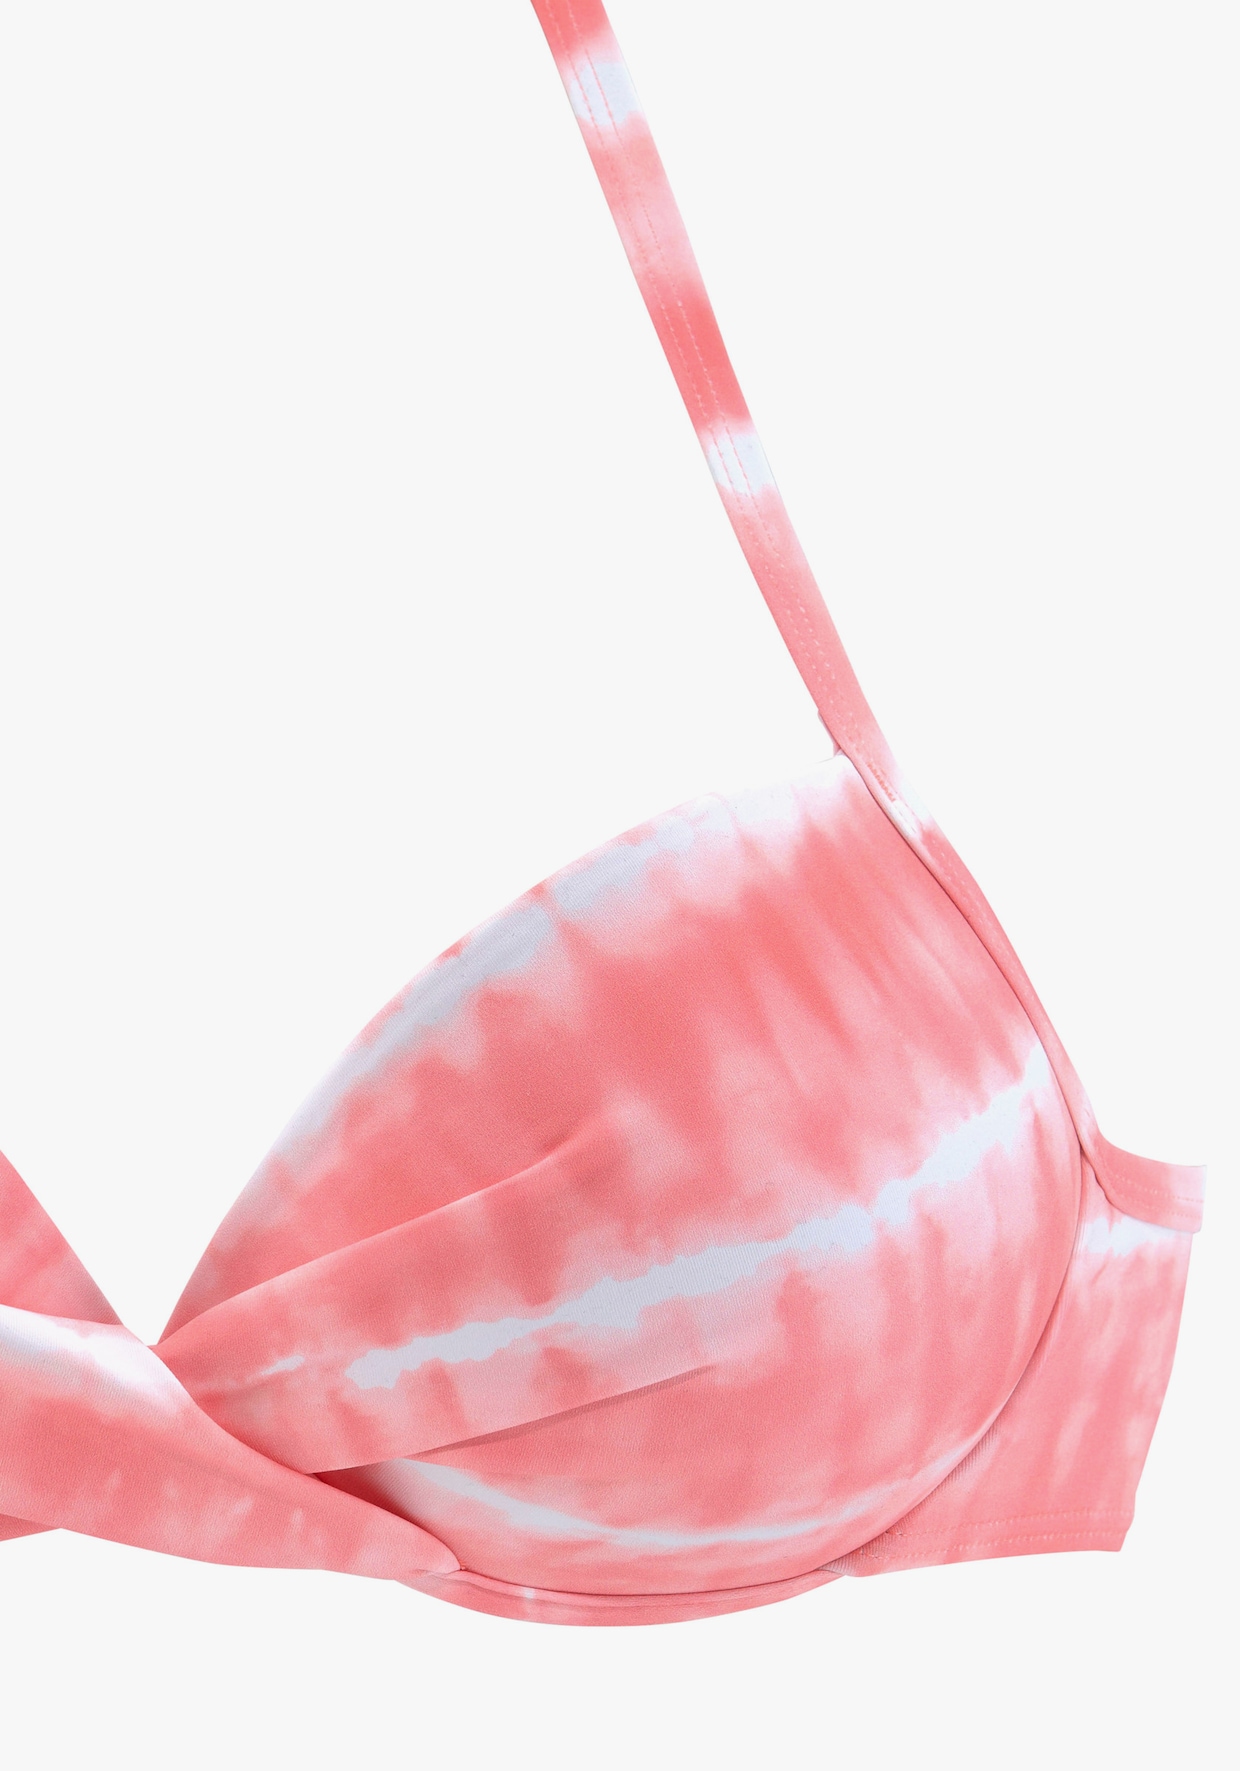 s.Oliver Push-Up-Bikini-Top - lobster-weiss